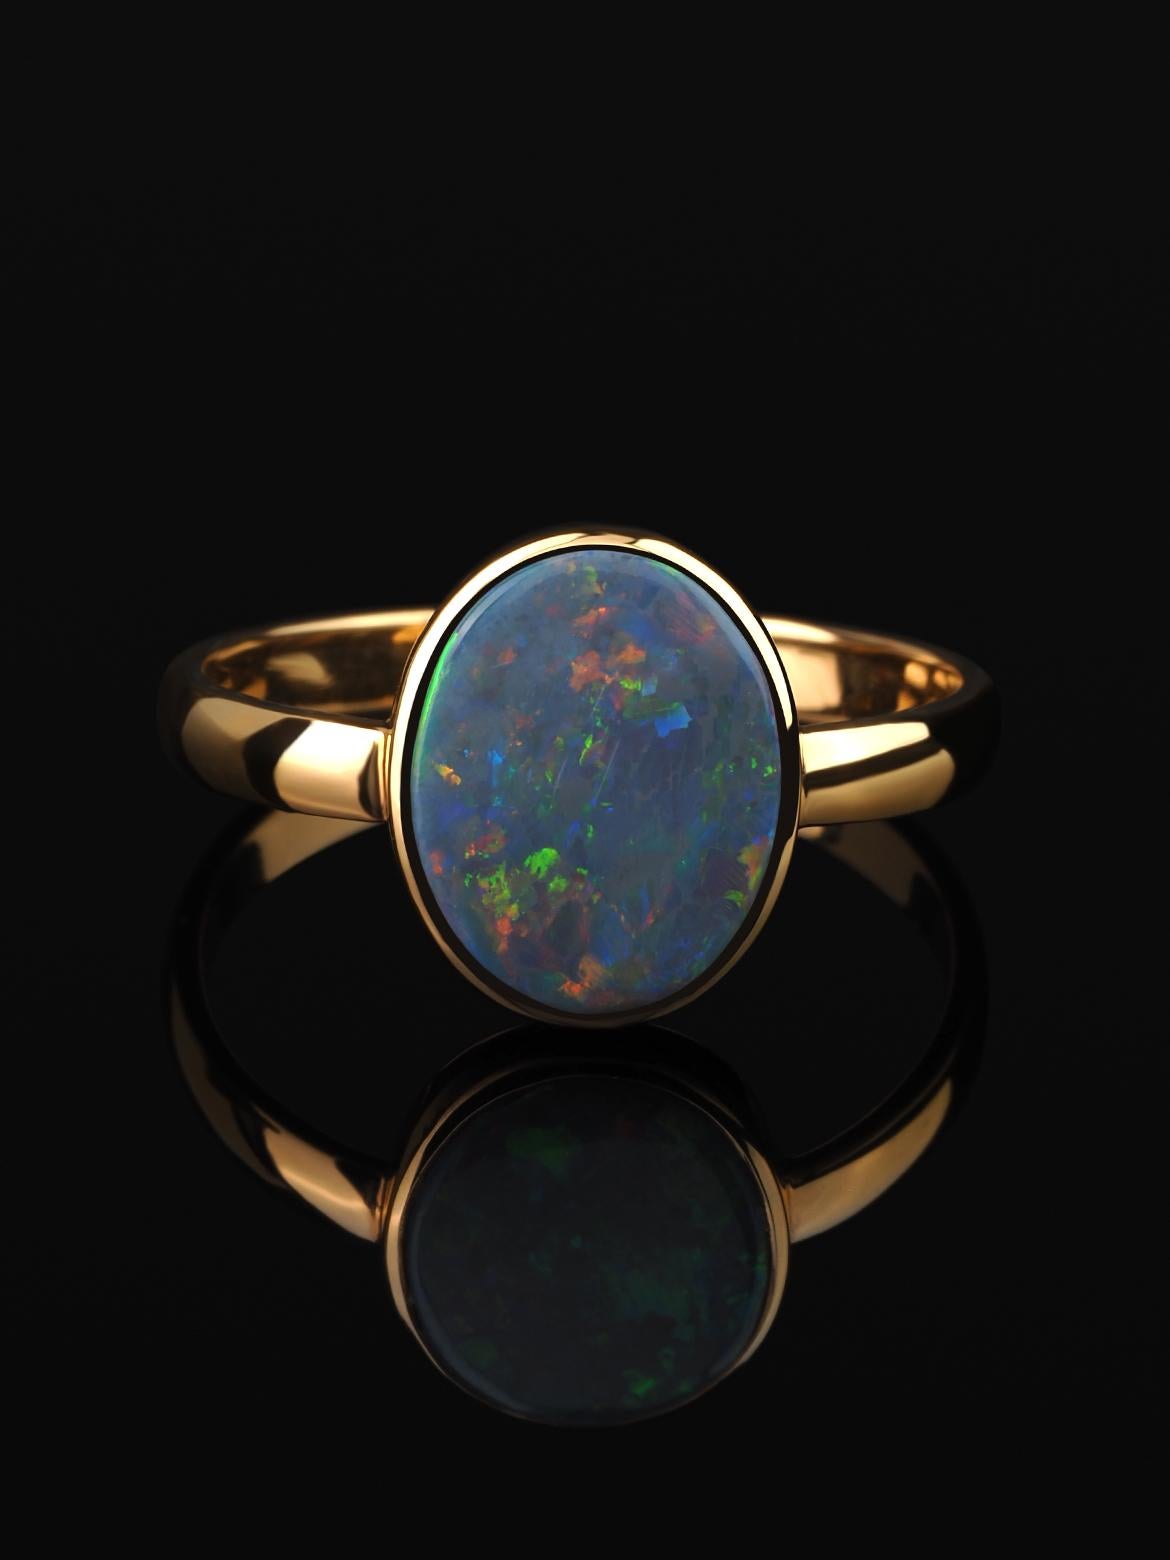 Black opal gold ring 18K yellow gold
opal origin - Australia 
stone measurements - 0.12 х 0.31 х 0.43 in / 3 х 8 х 11 mm
opal weight - 1.65 carats
ring weight - 2.72 grams
ring size - 8 US 

Minimal collection


We ship our jewelry worldwide – for